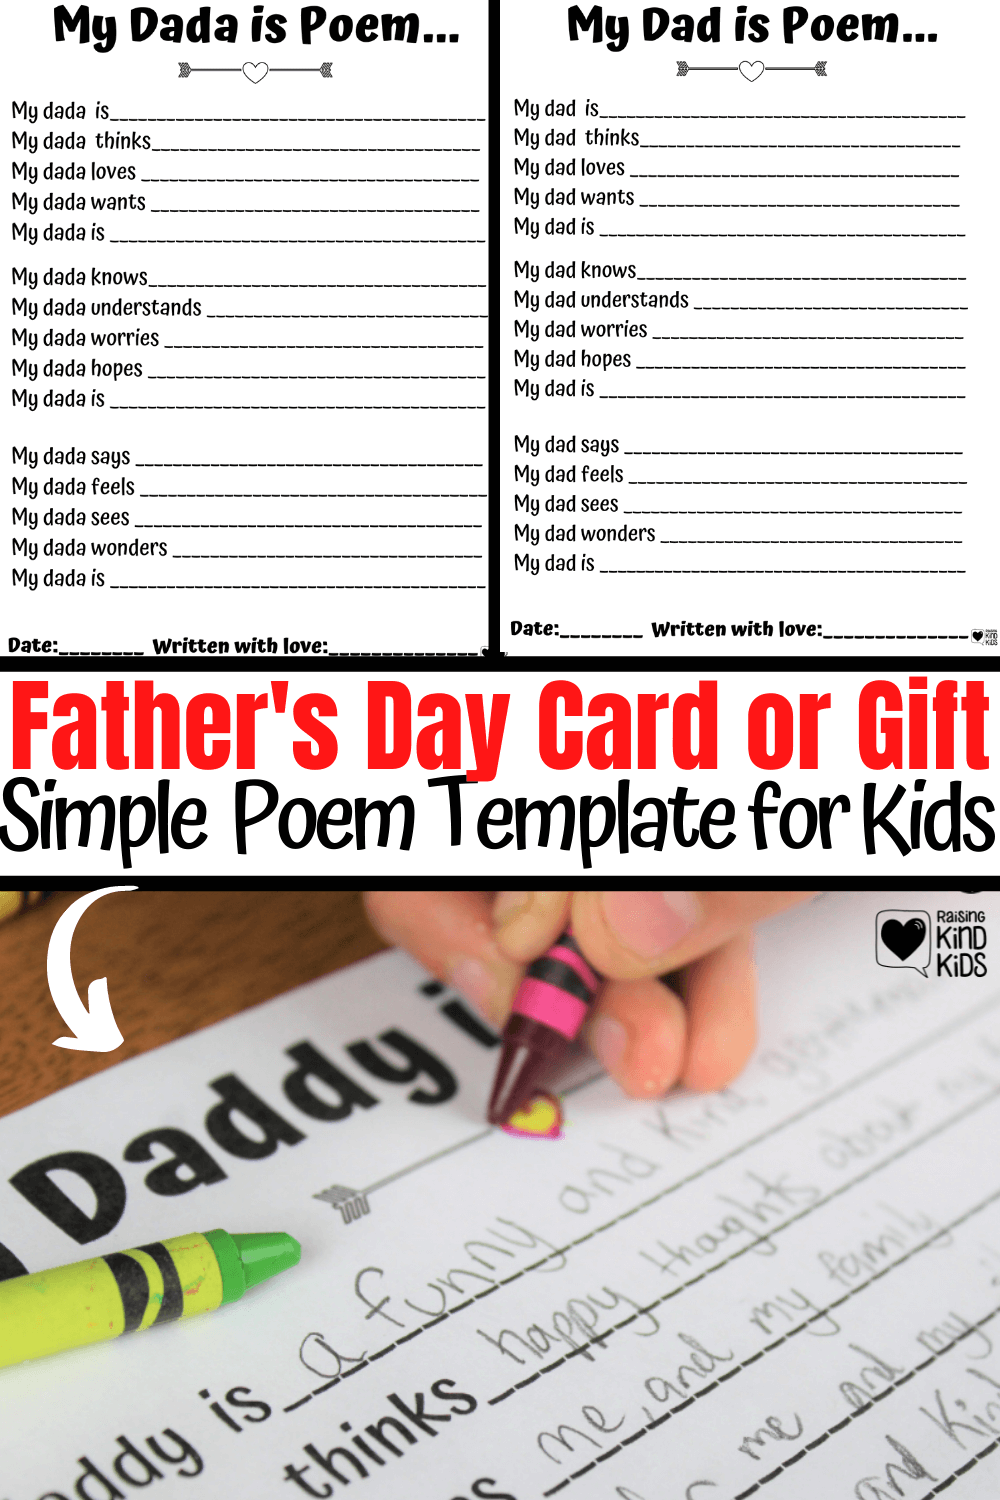 These Father's Day cards from kids are so sweet and meaningful because they're Father's Day Cards kids can make. #fathersday #fathersdaycards #fathersdaygifts #cardskidscanmake #